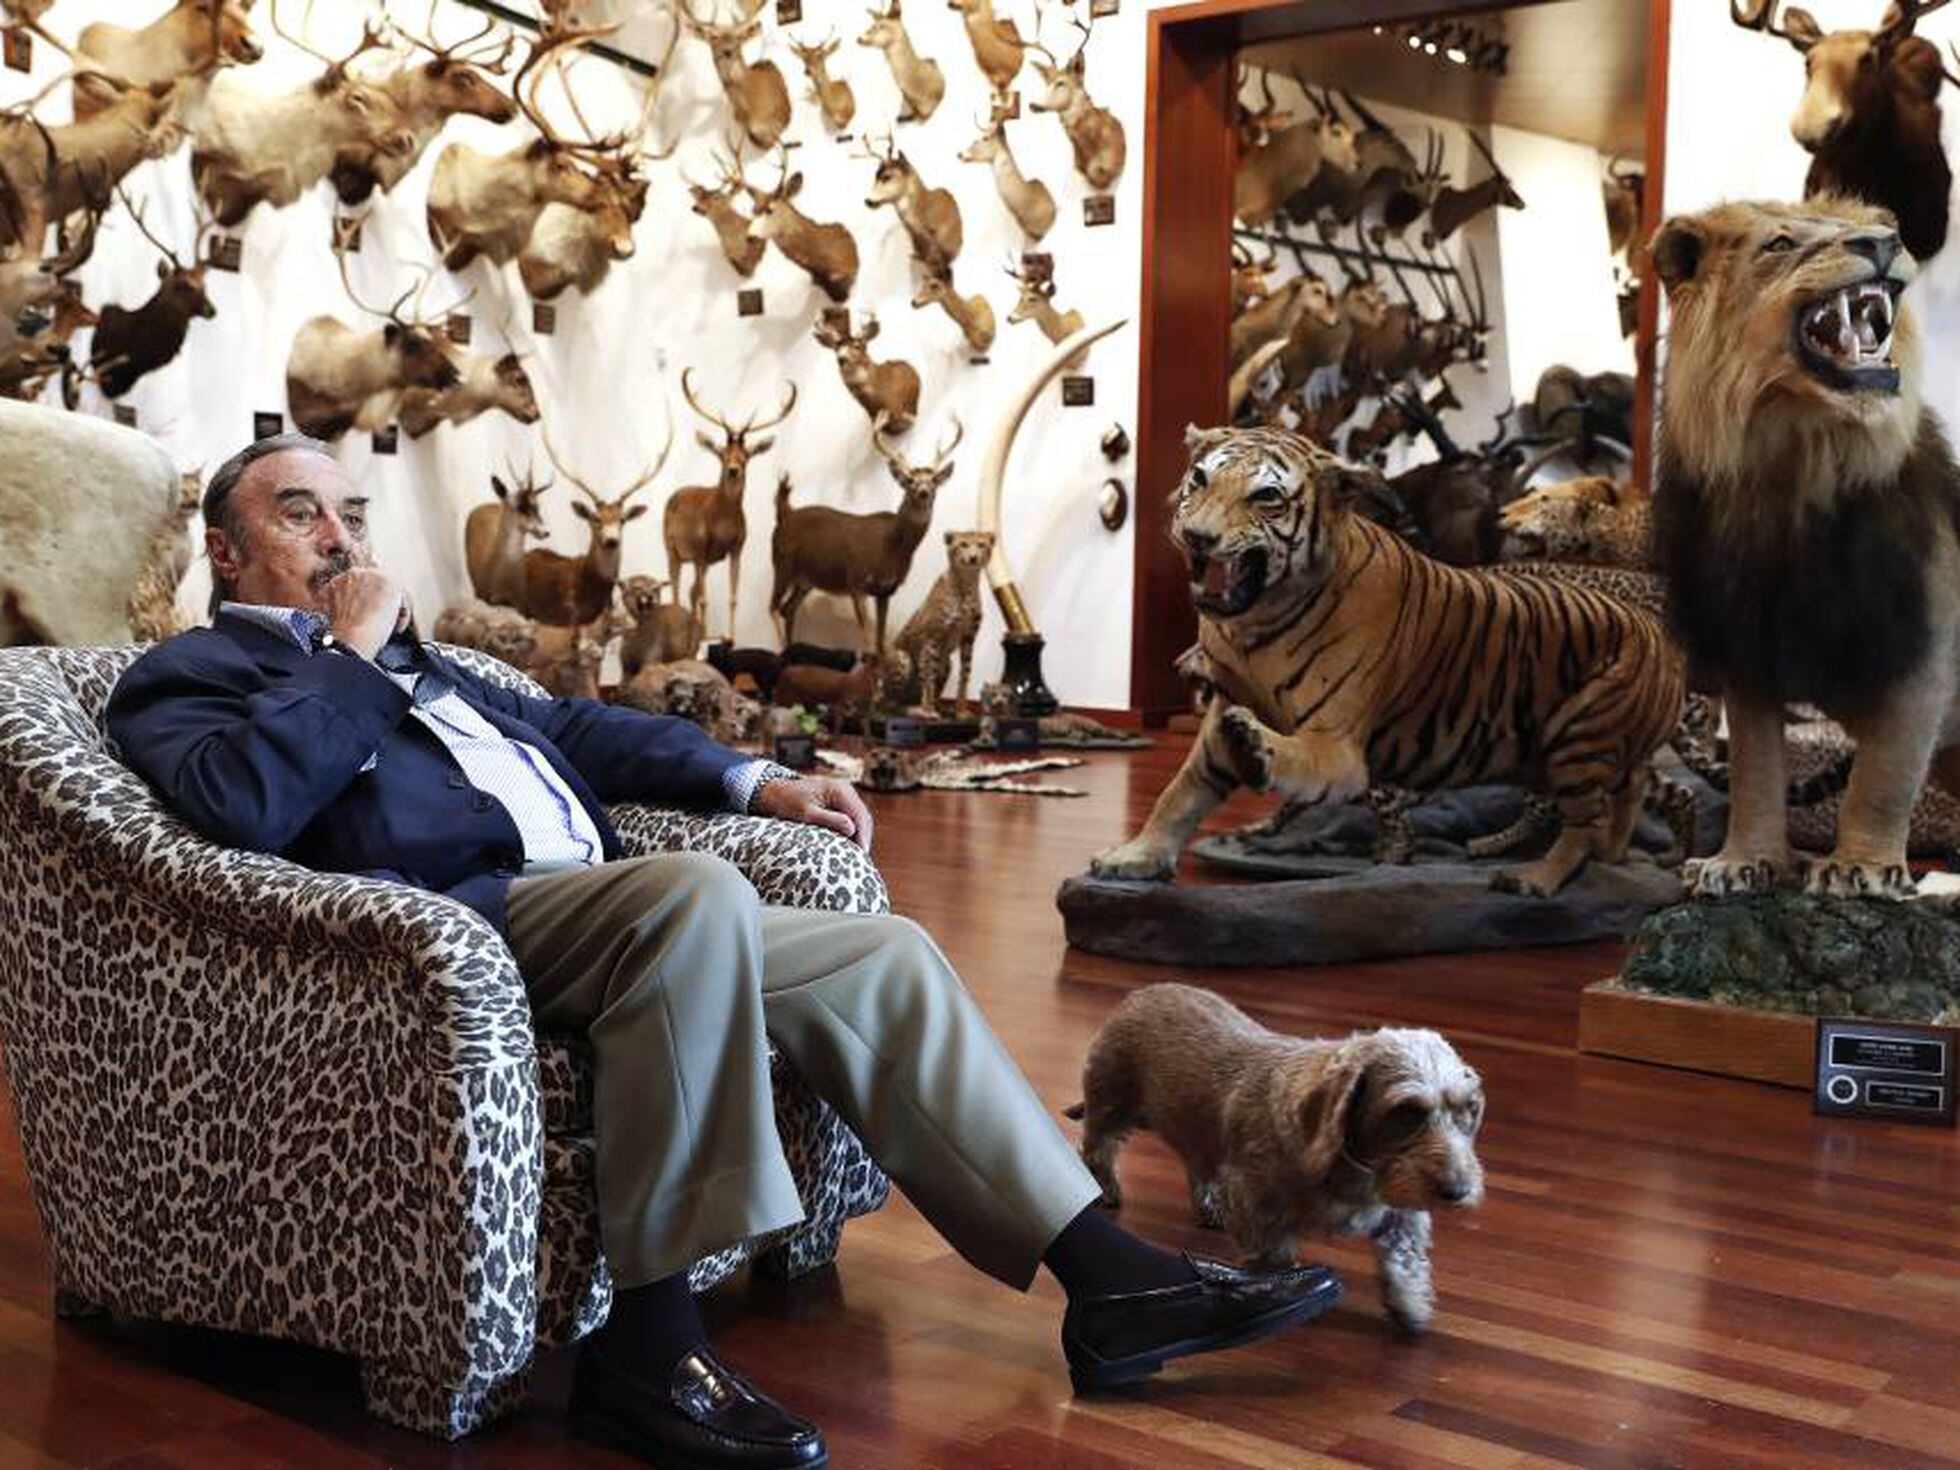 Spanish museums: The Spanish businessman who hunted a museum's worth of  animals | Life in Spain | EL PAÍS English Edition